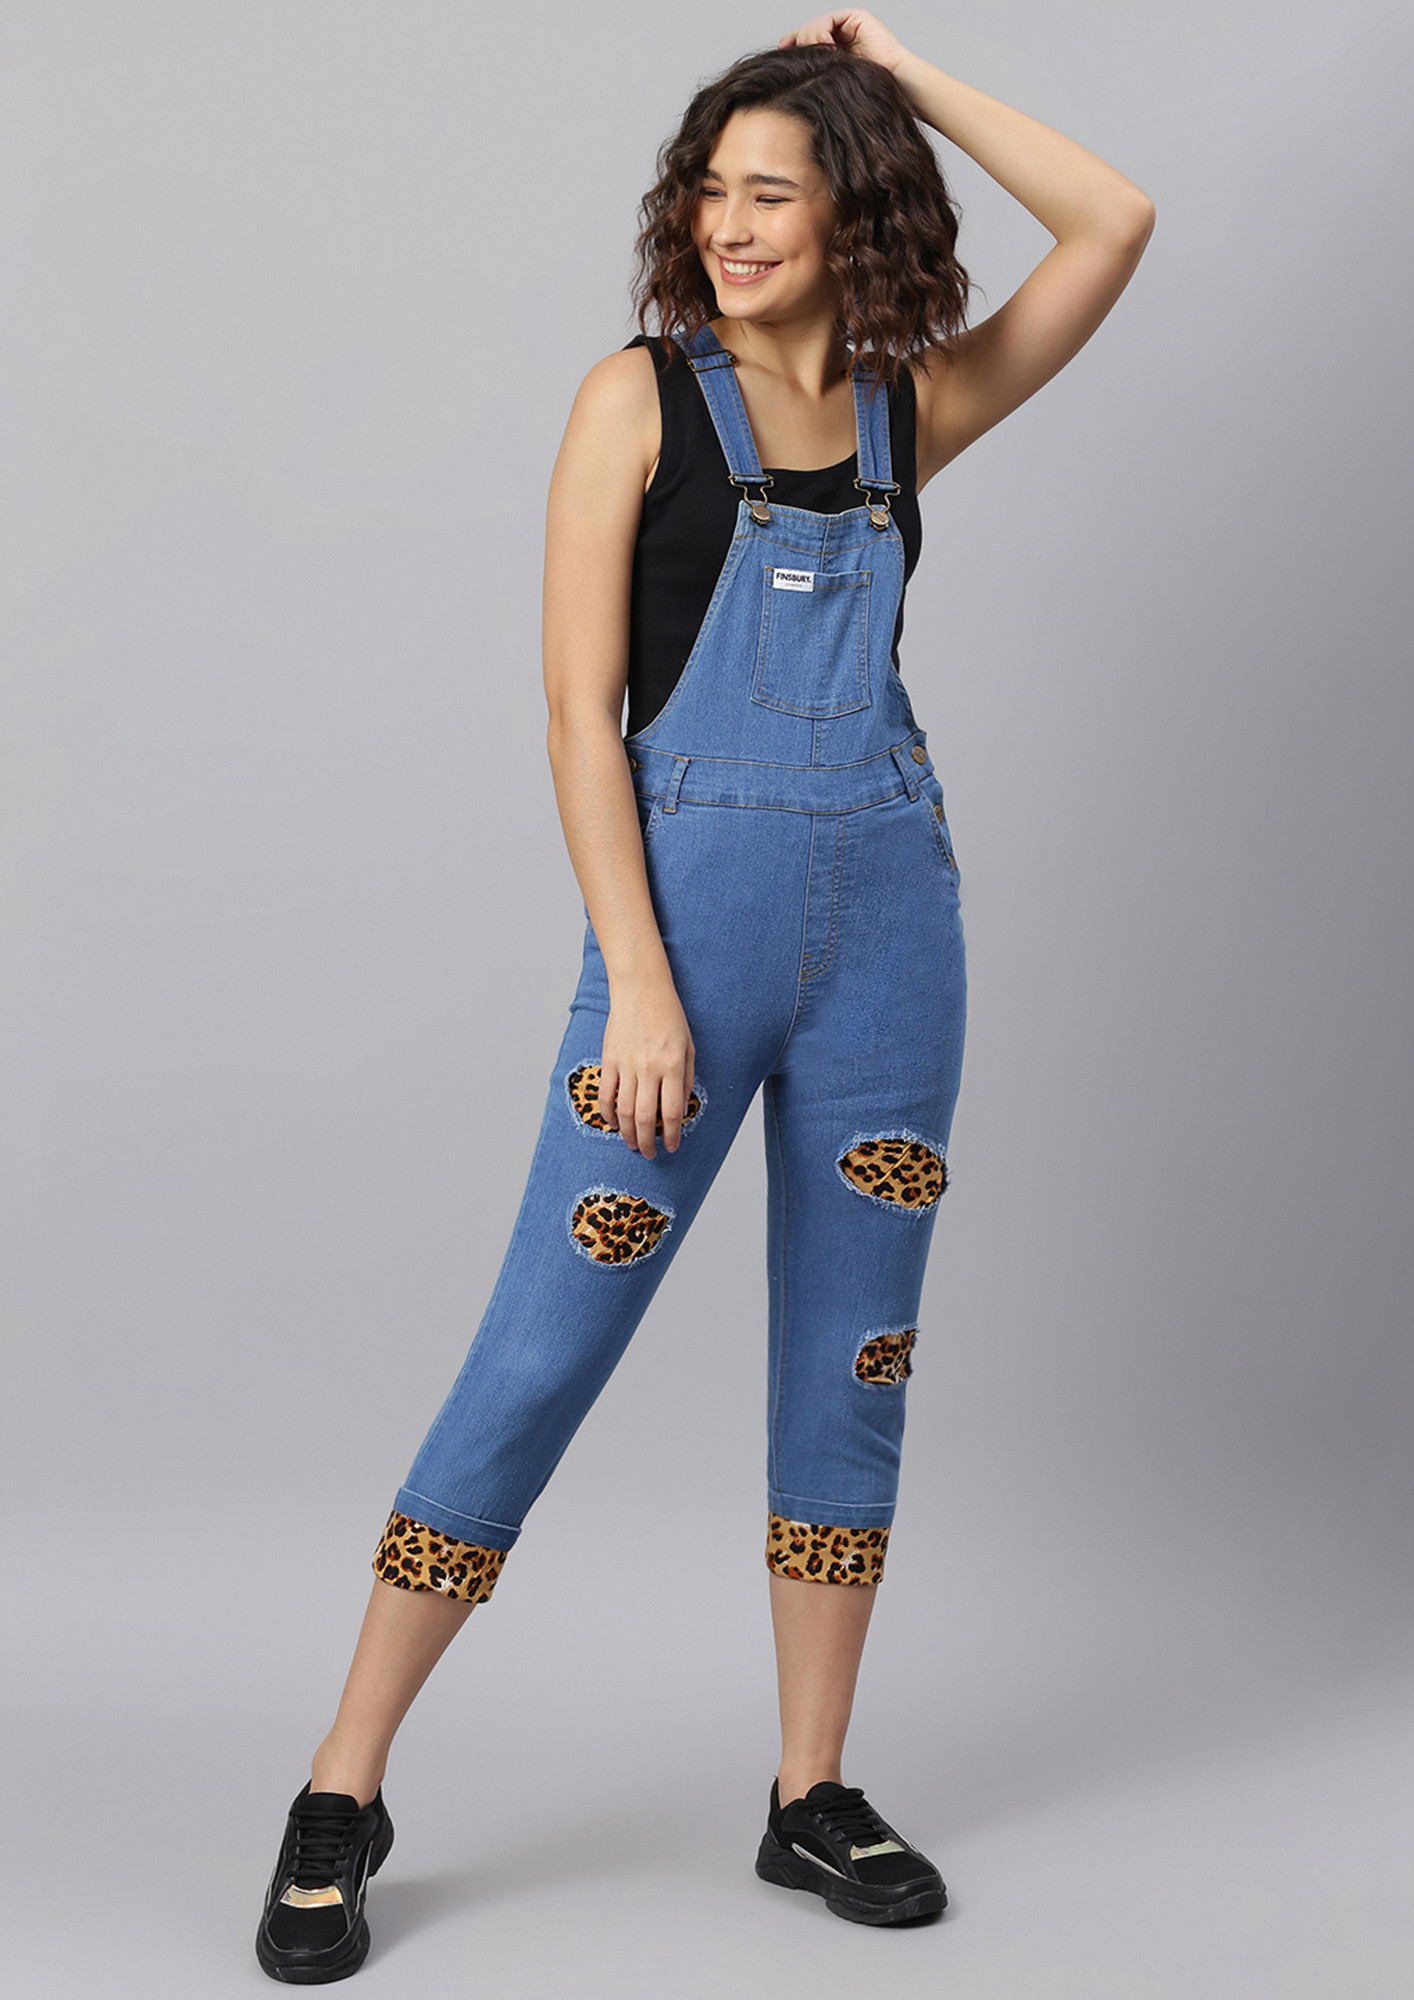 Finsbury Women Denim Dungaree with Leopard Print Infusion